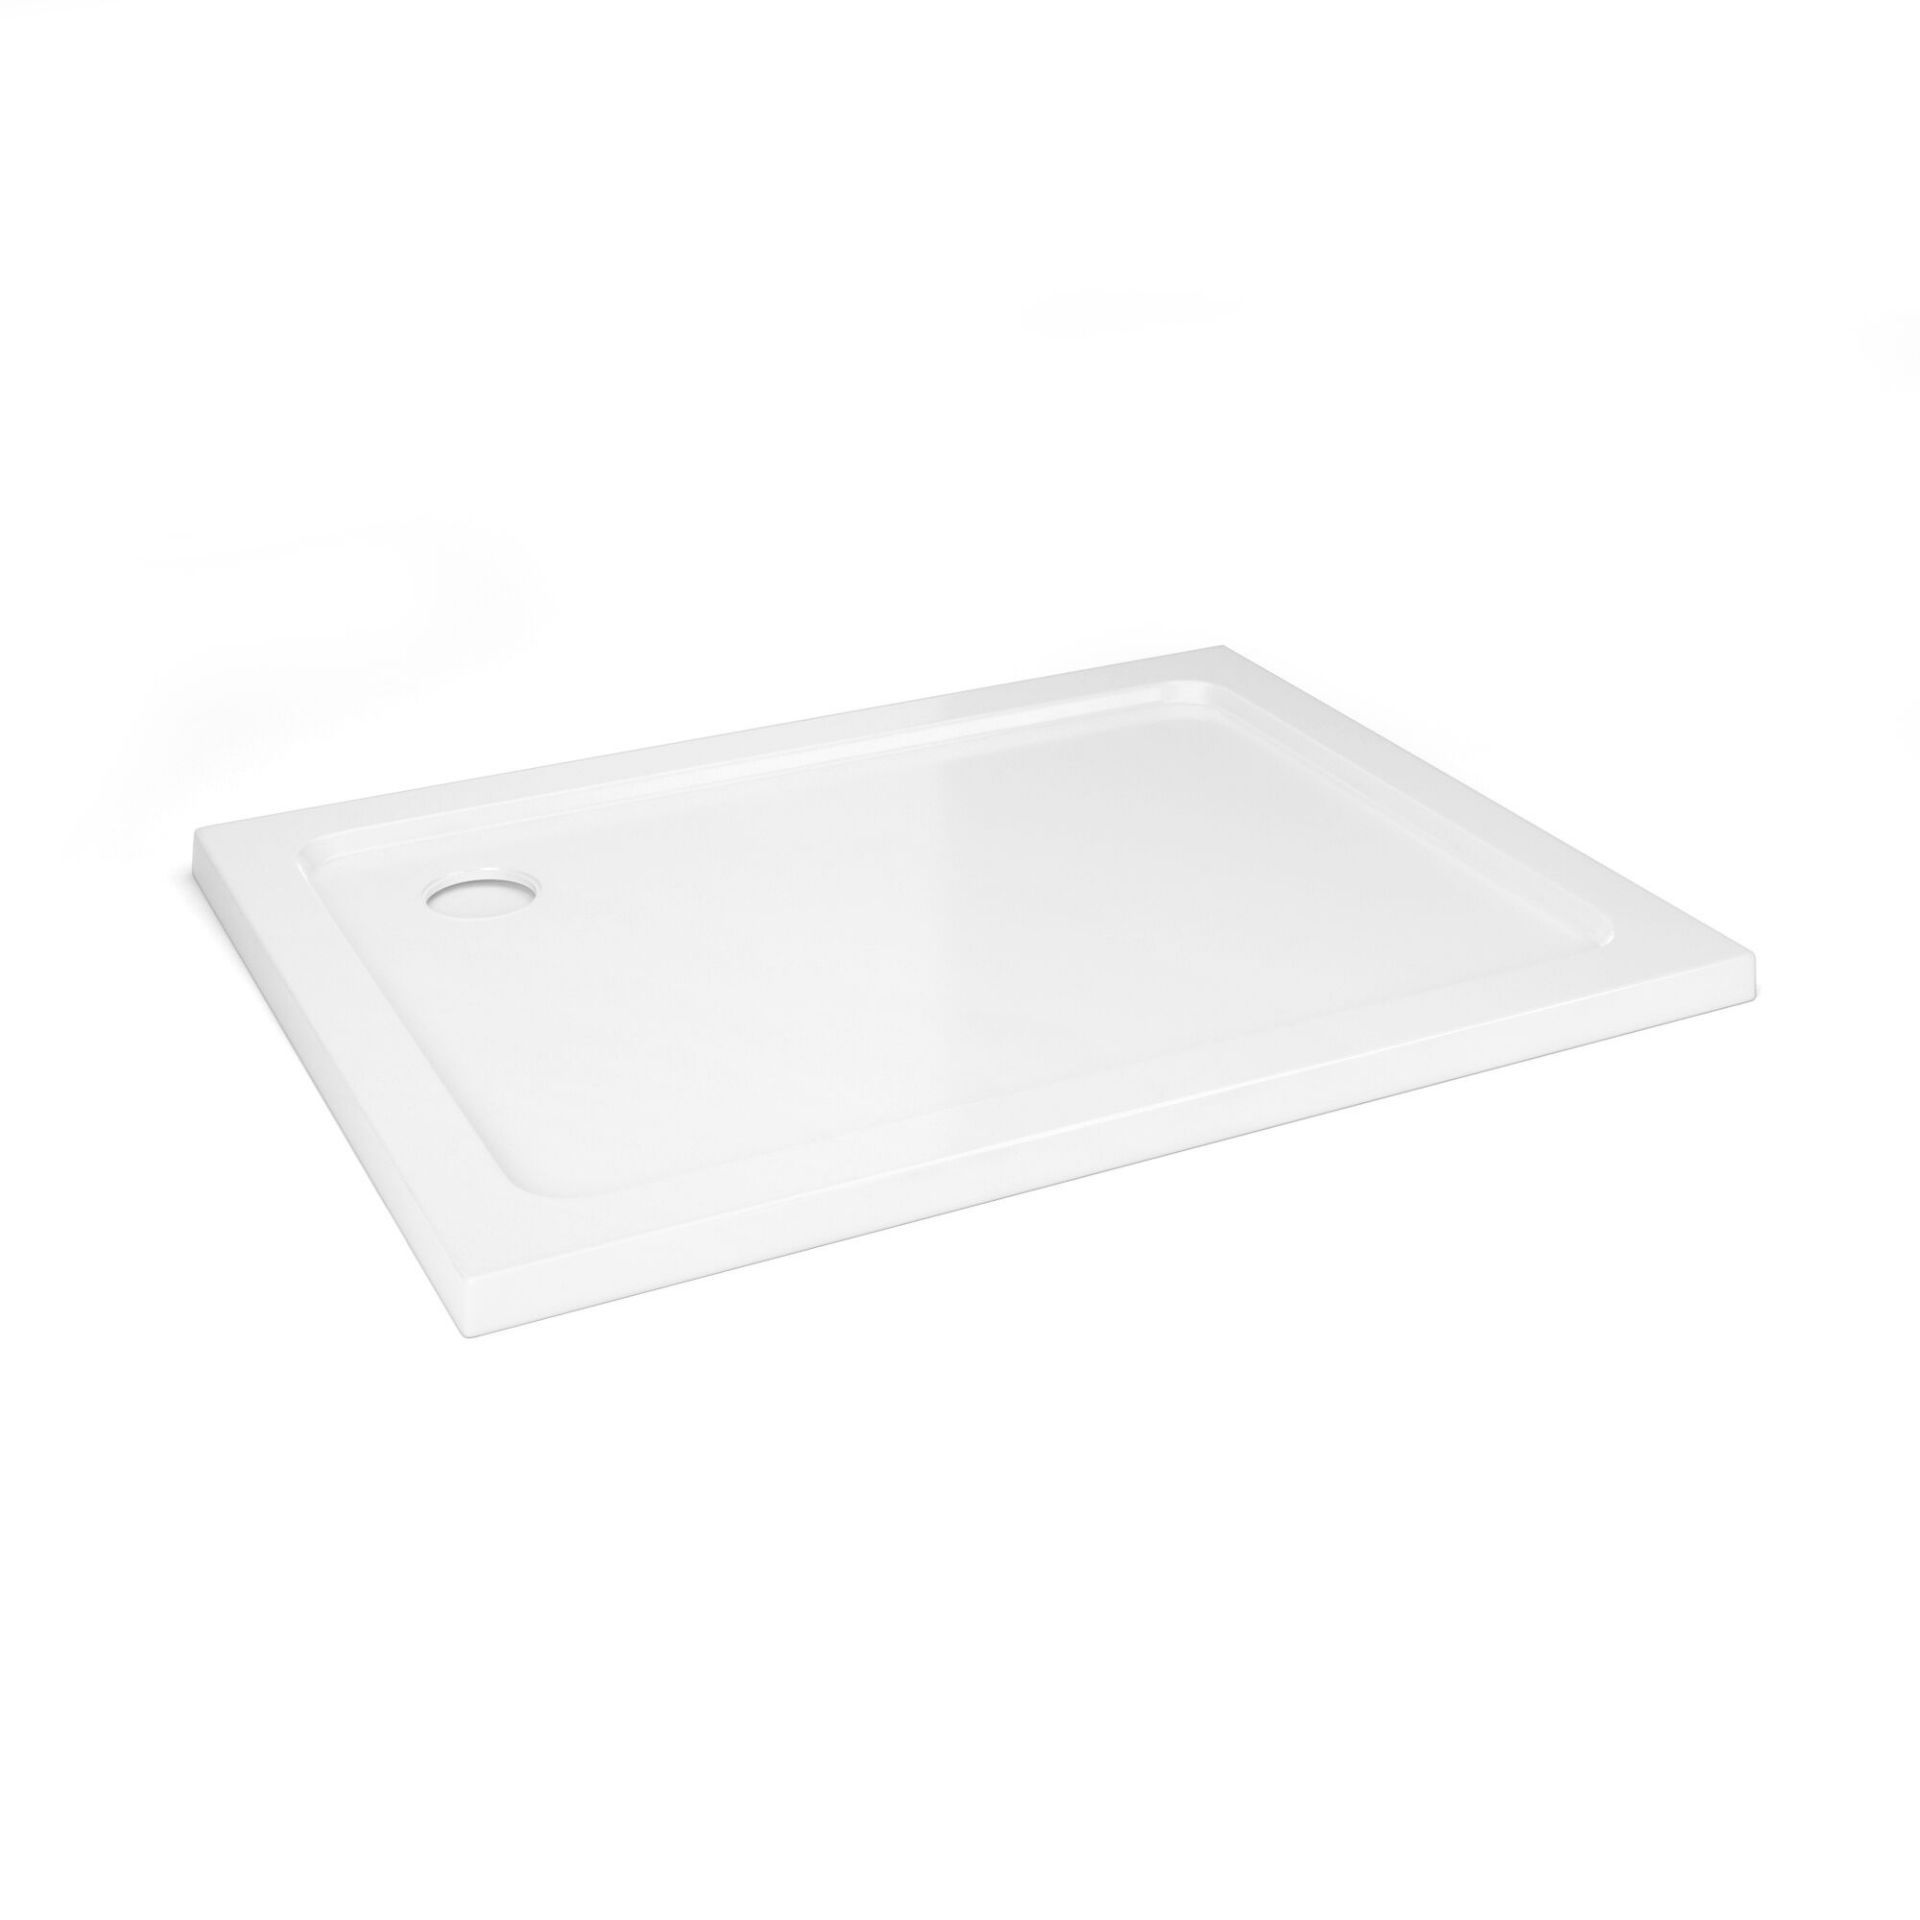 NEW 1200x800mm Rectangular Stone Shower Tray - Ultra Slim.RRP £399.99.Low profile ultra slim d... - Image 2 of 2